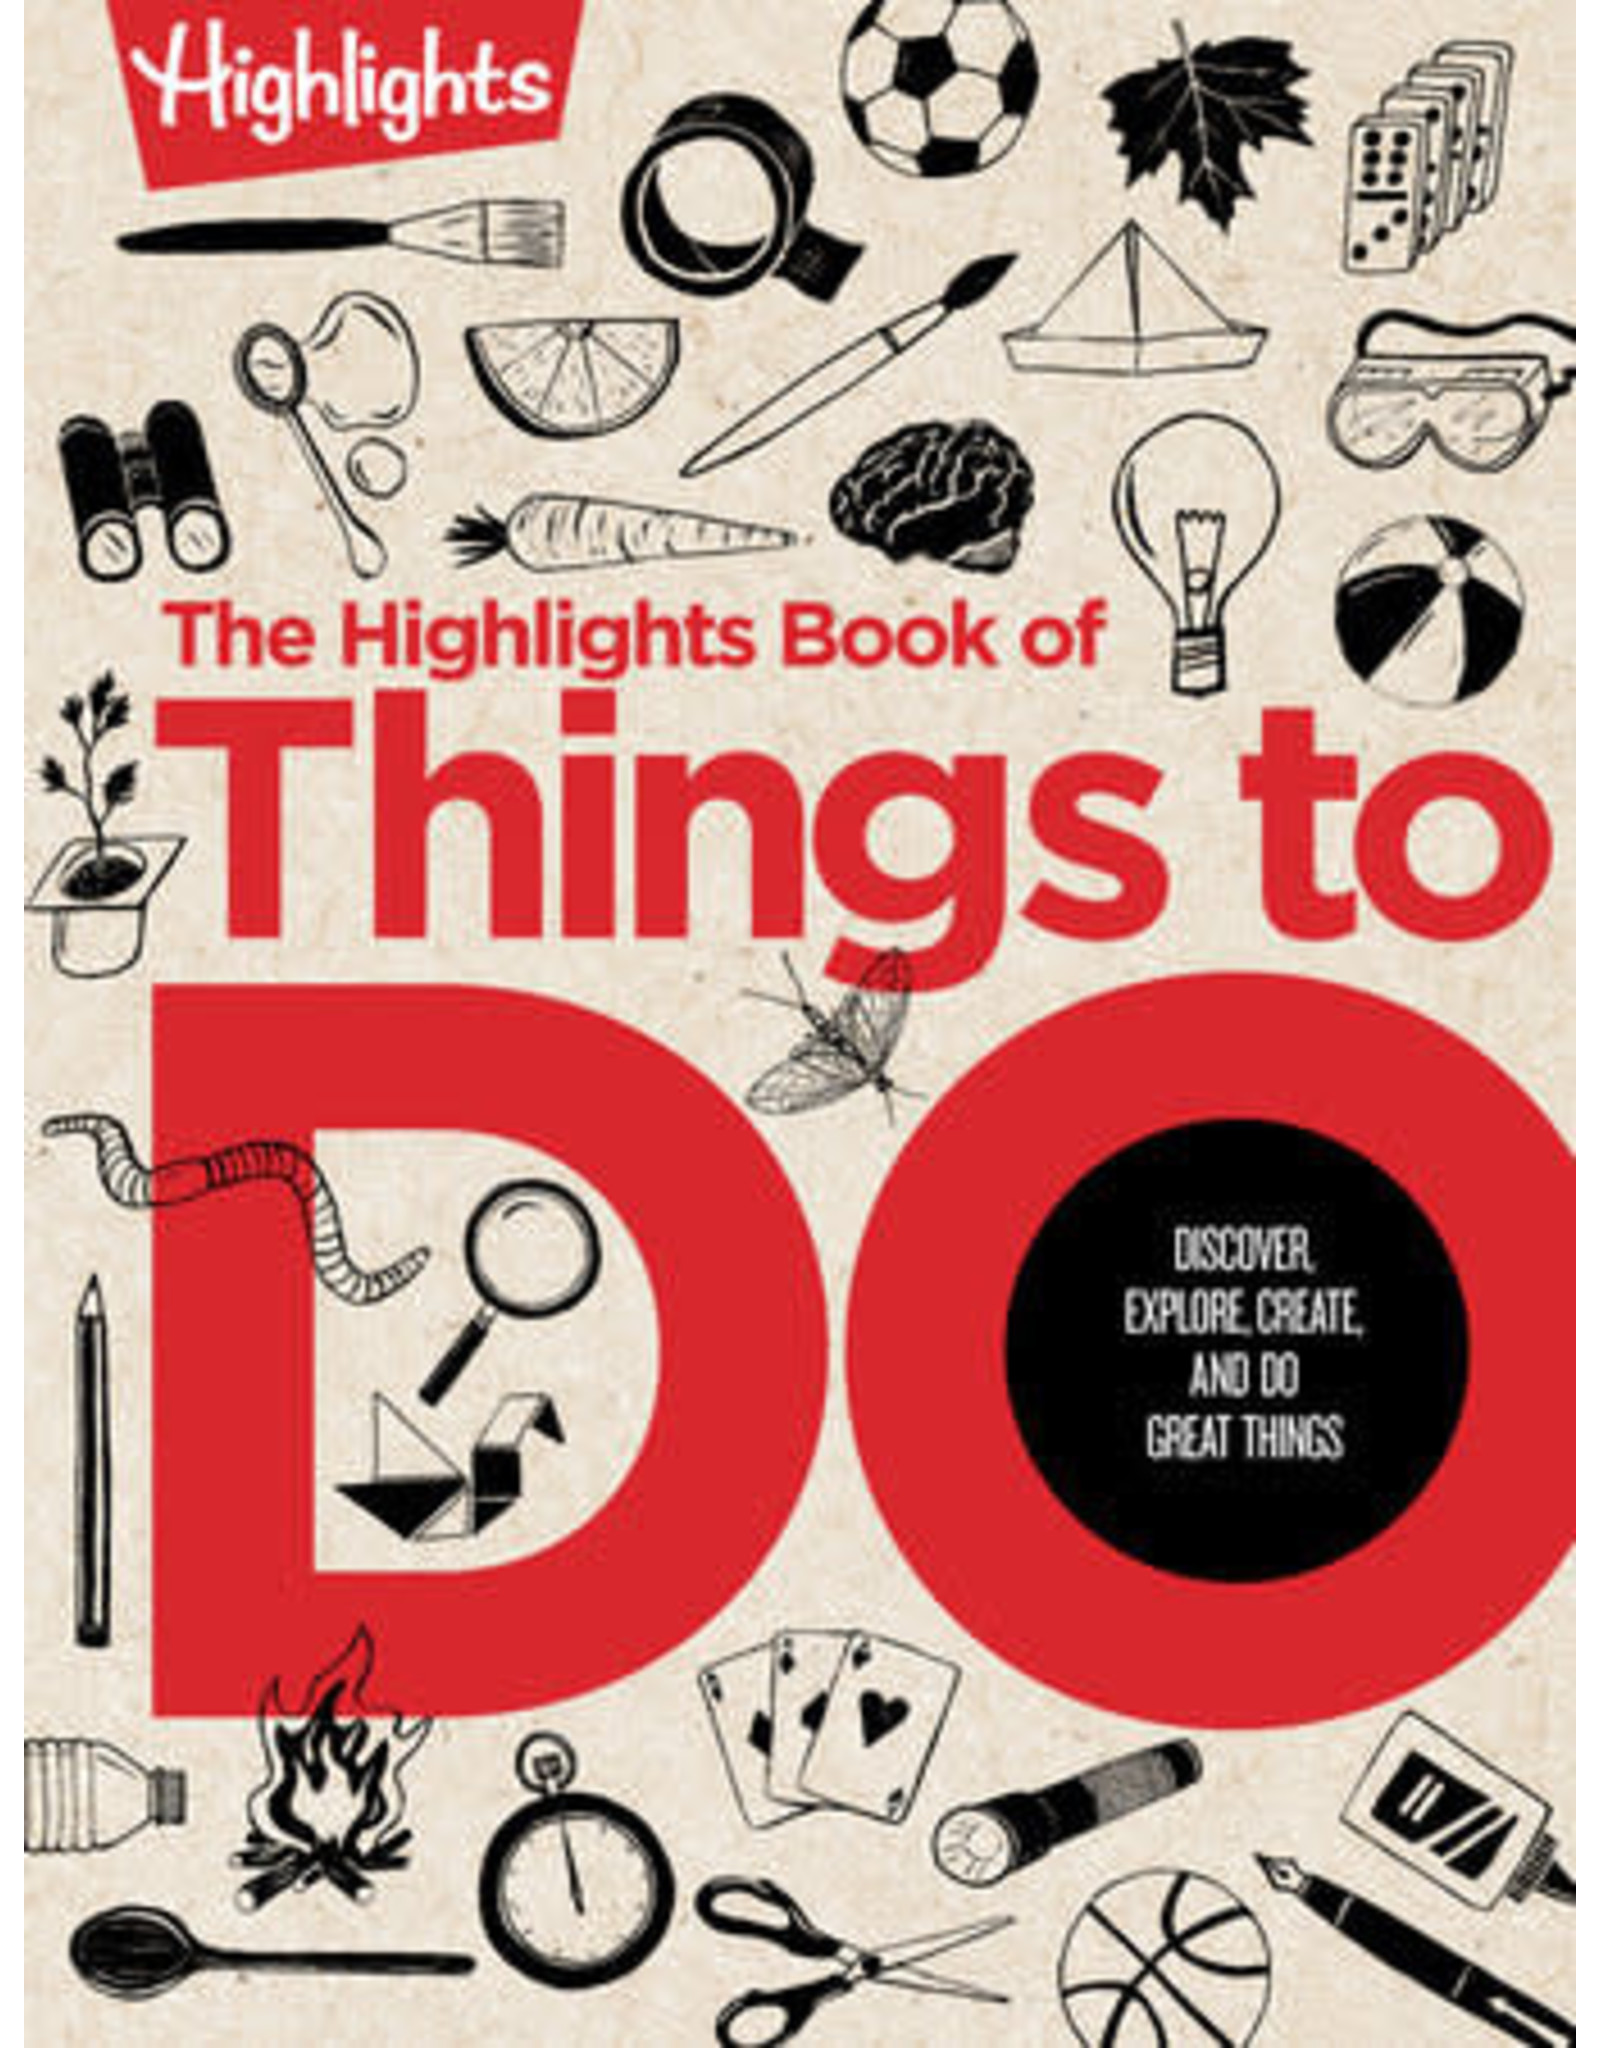 Highlights The Highlights Book of Things to Do - Hard Cover